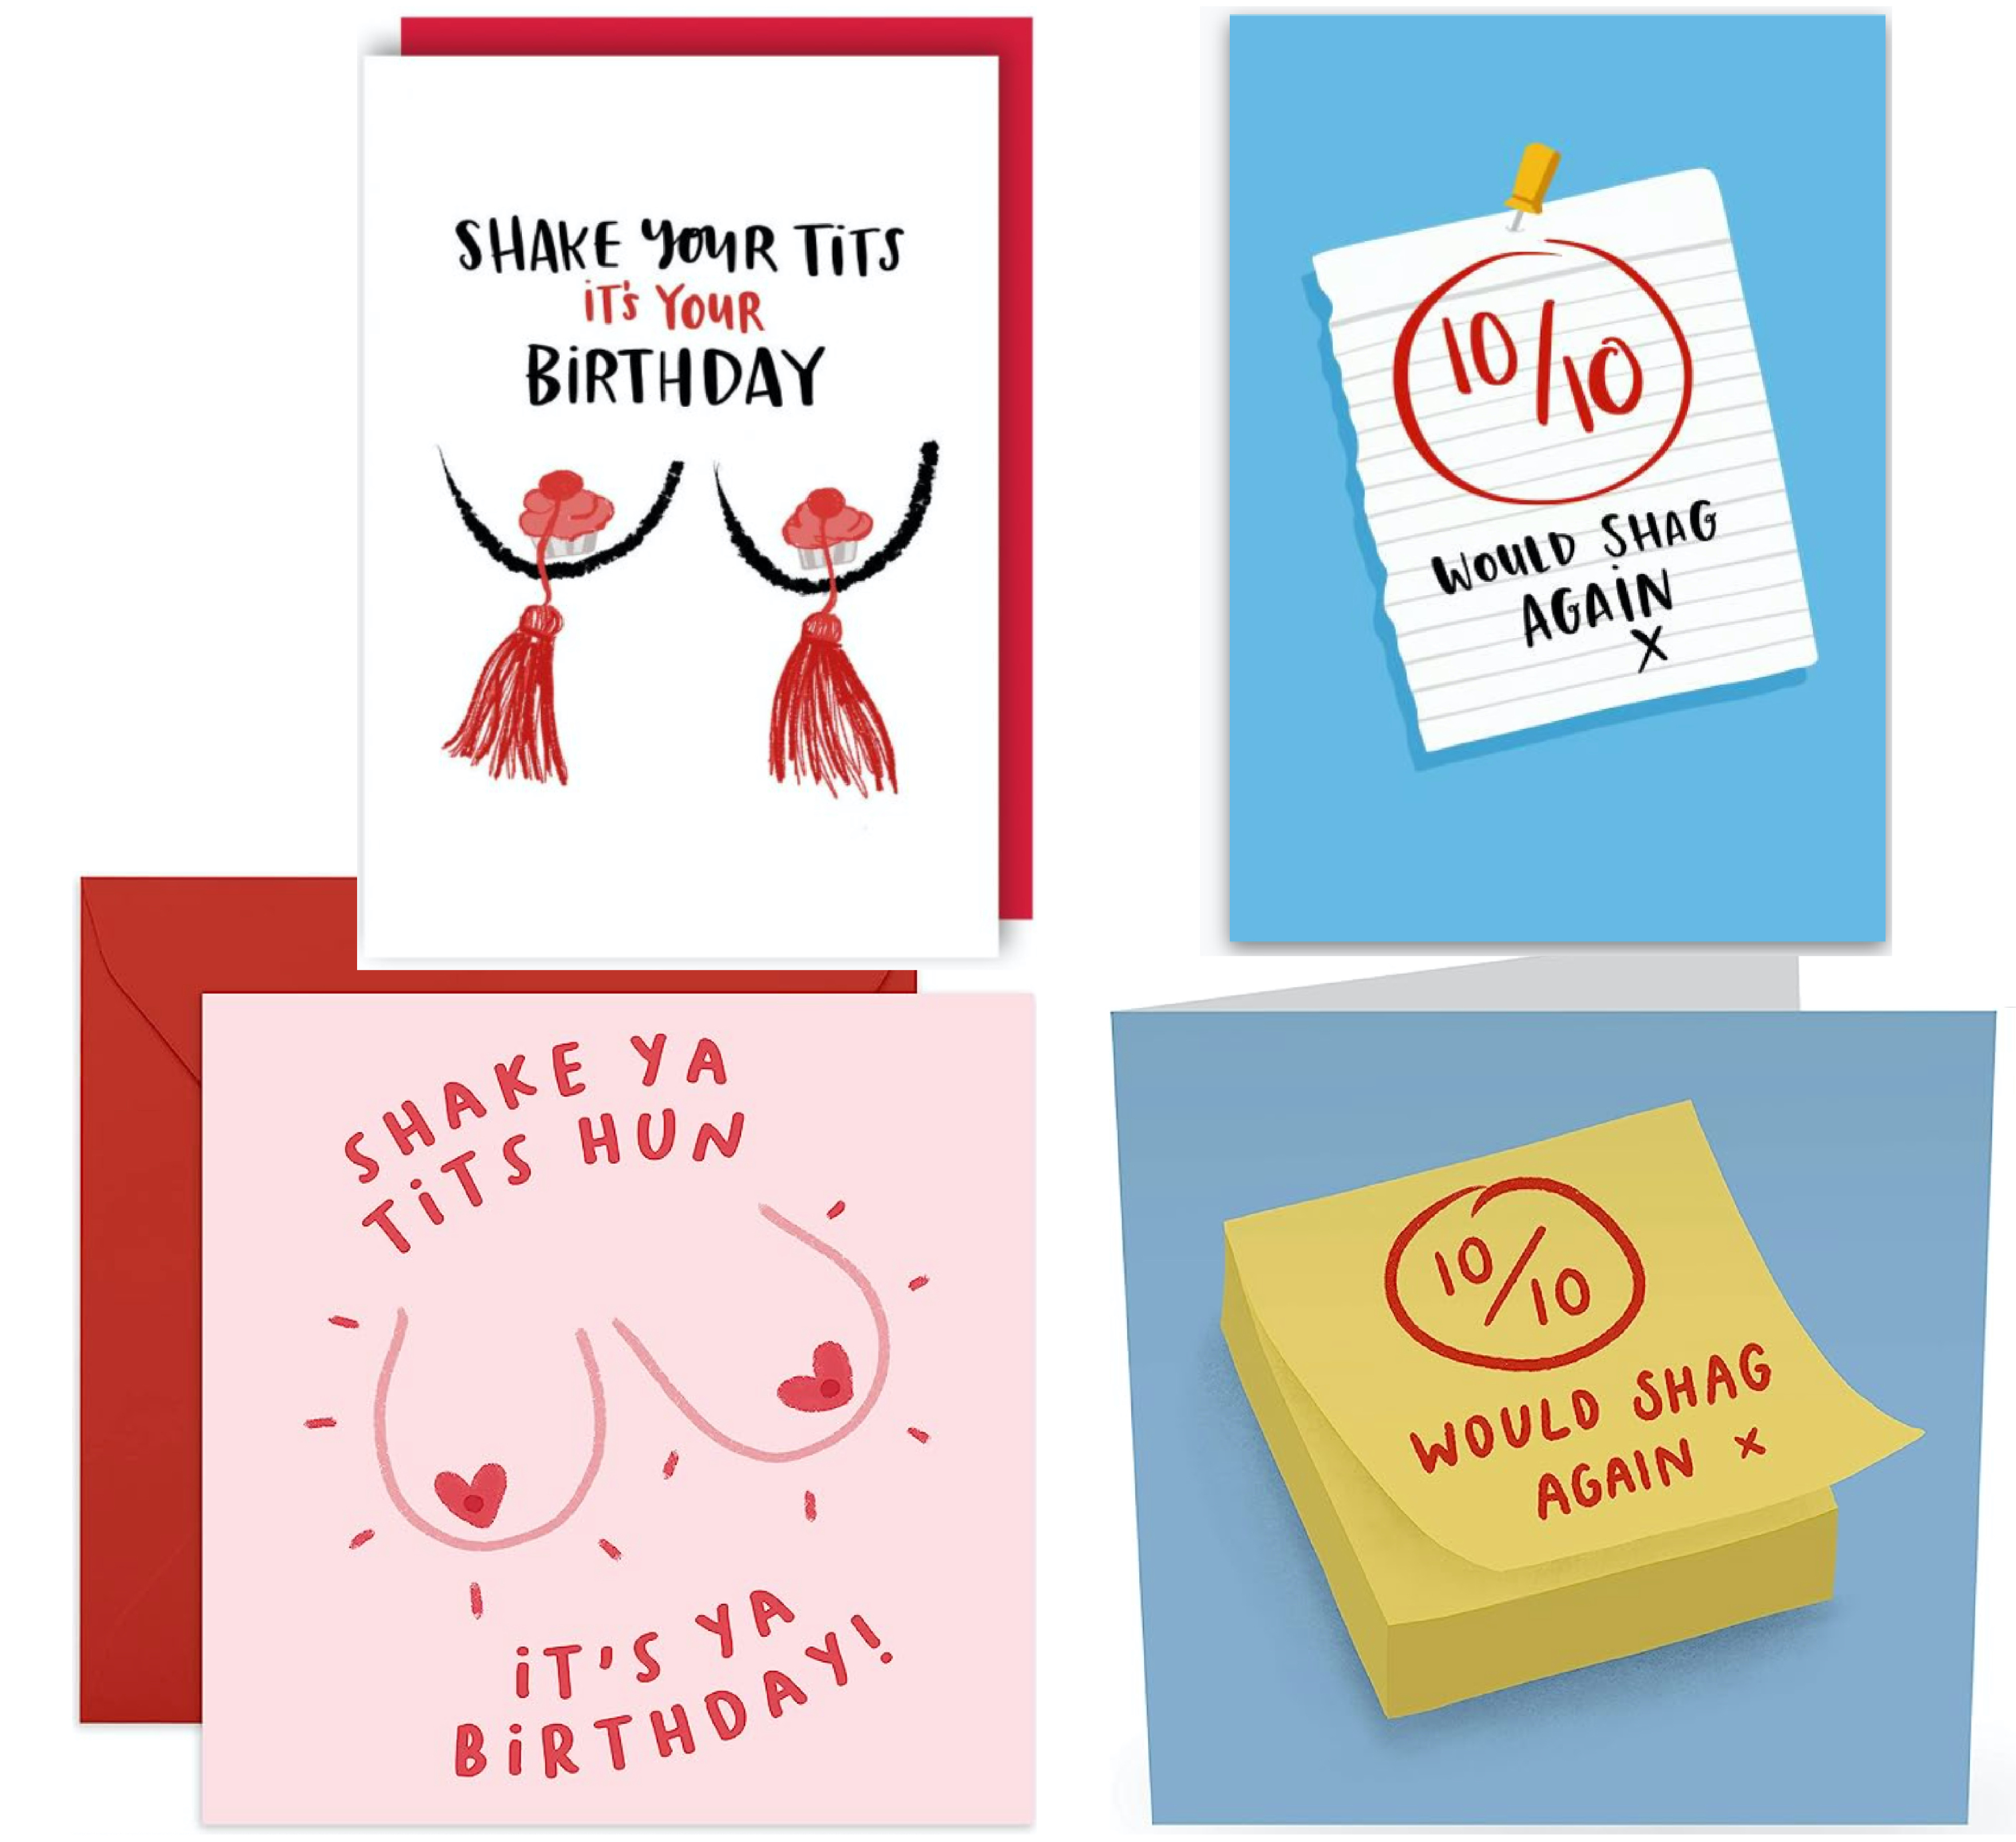 Shake Your Tits It's Your Birthday by Lucy Maggie Designs